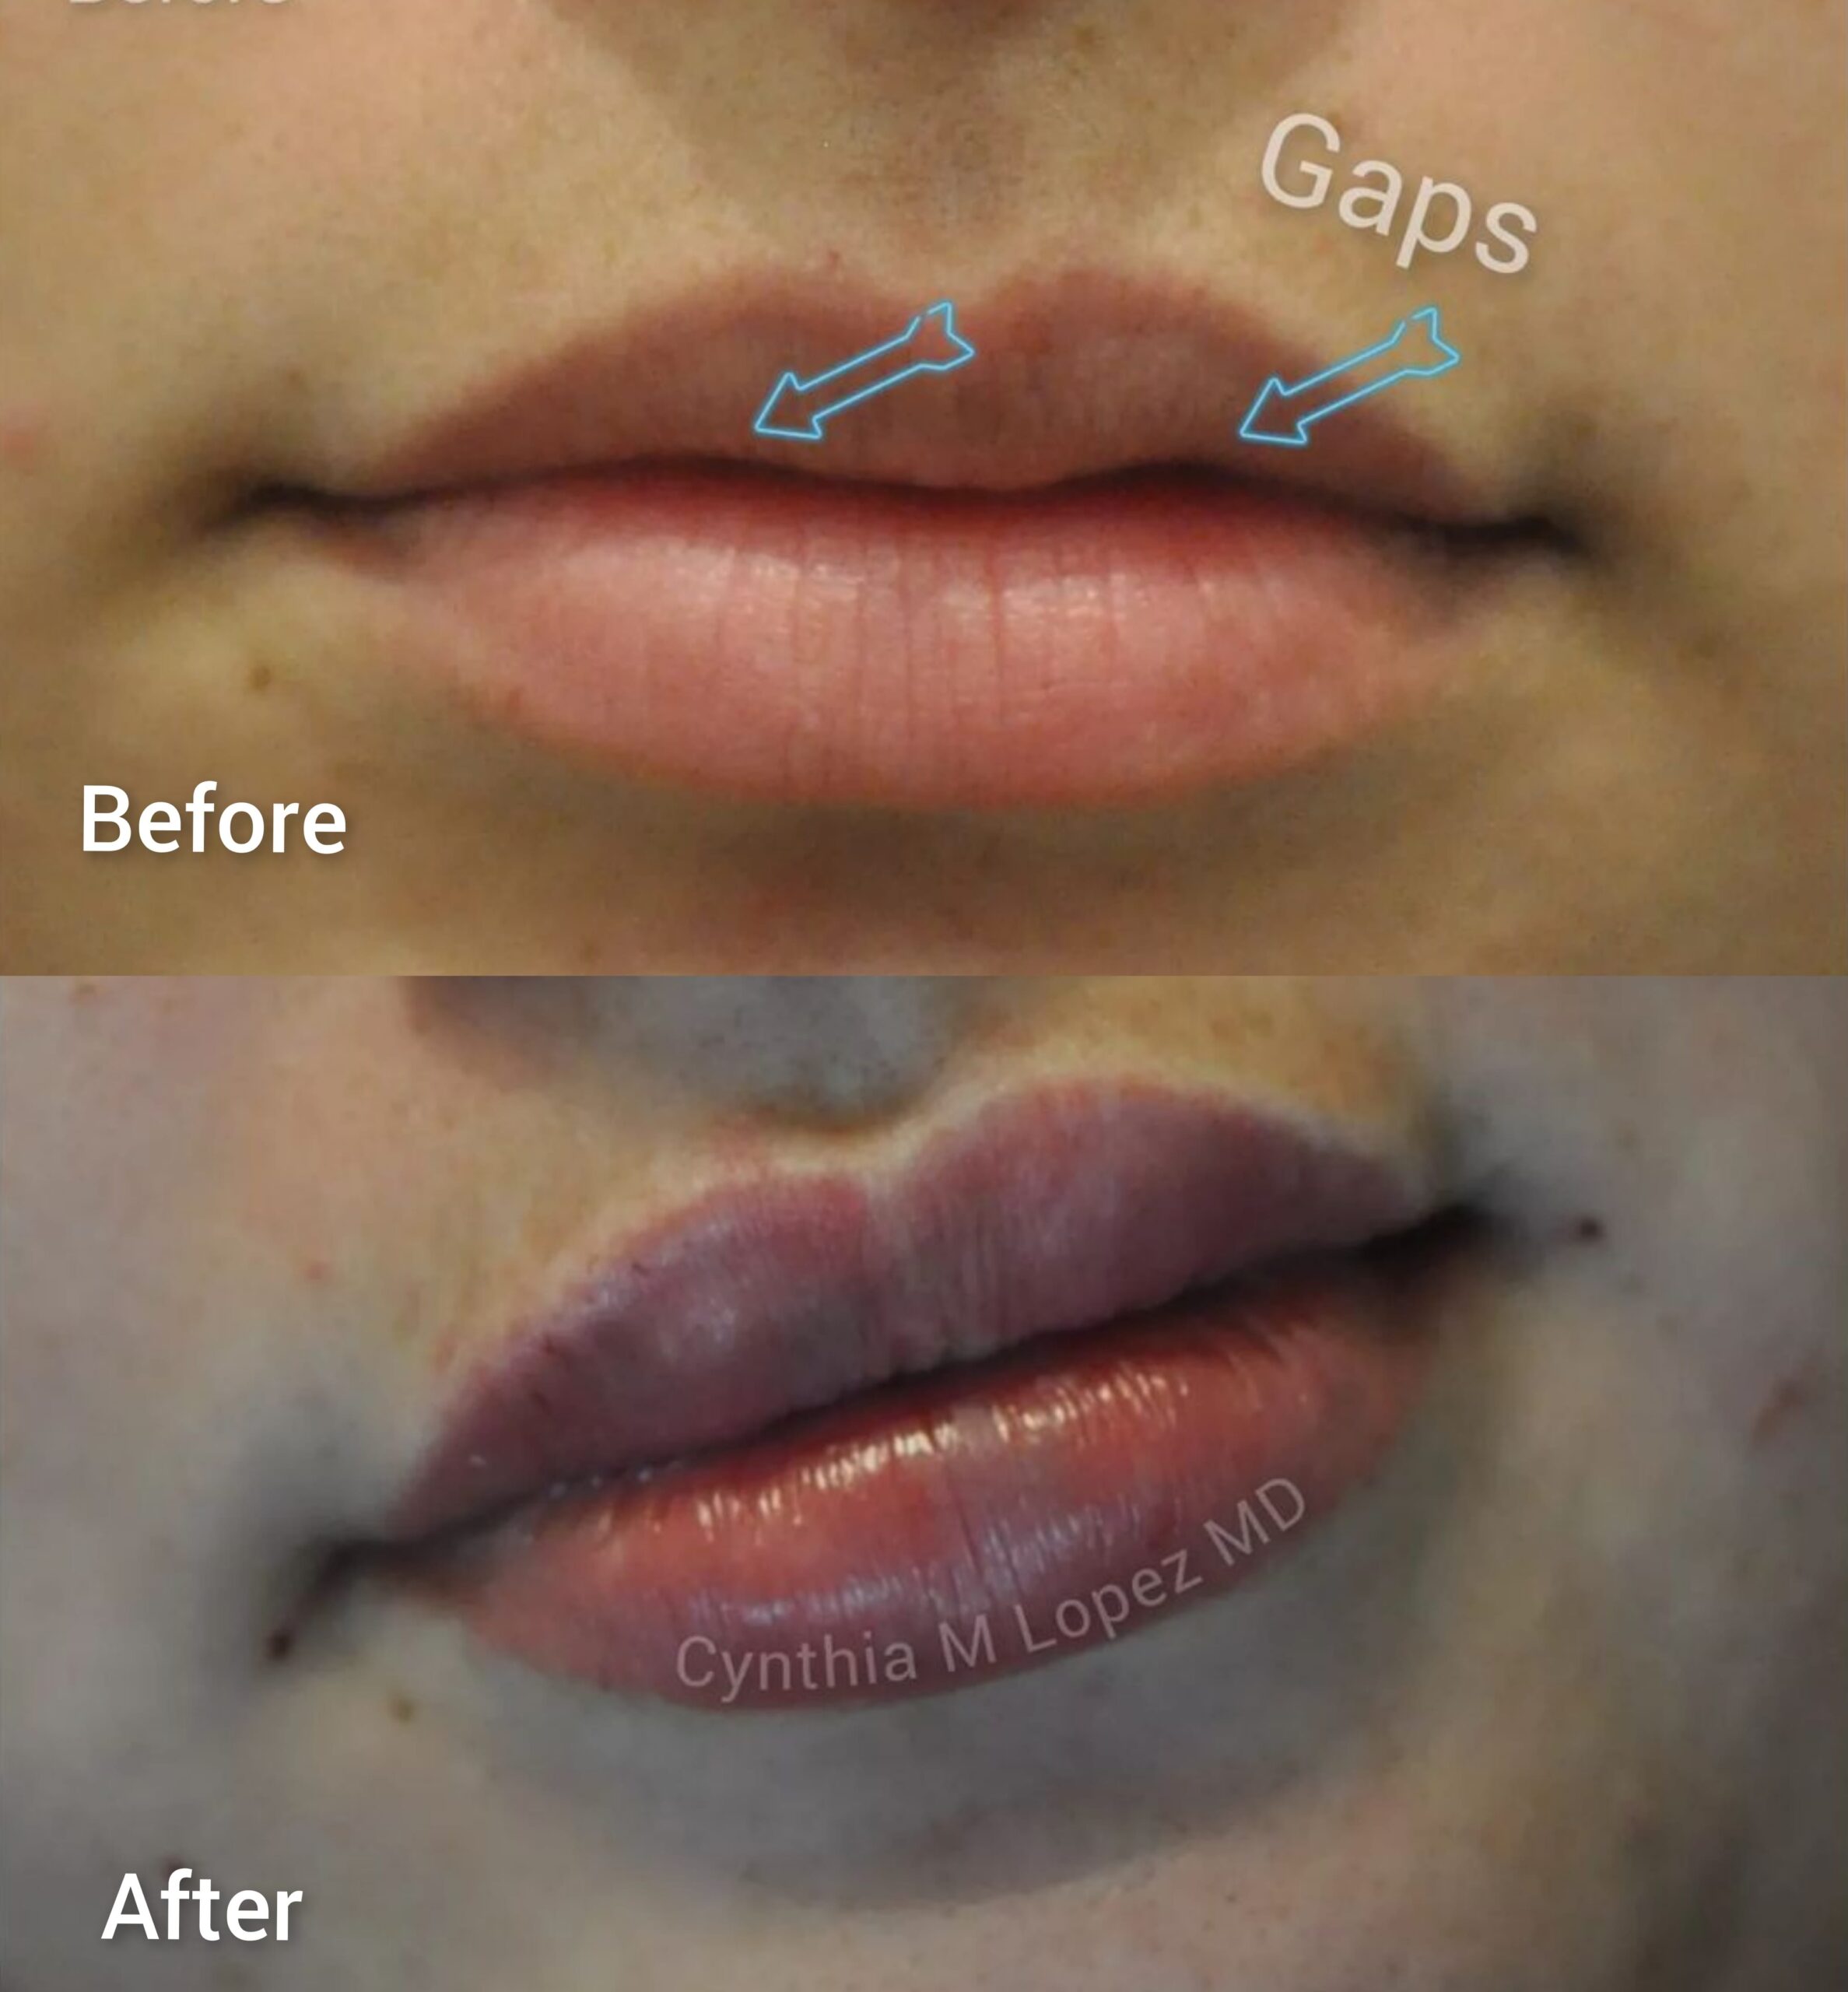 The before top image shows a young female lips in her 30’s. Her top lip is moderately M shaped. The middle portion is beaky-looking. The sides have gaps and folds towards the teeth. She wants to have more lip show on the sides and fill in the gaps. The after right image shows naturally plumped-up lips after injection of hyaluronic acid filler. Her side lips now fuller and gaps gone, her cupid’s bow more defined and perky with a natural-looking pout